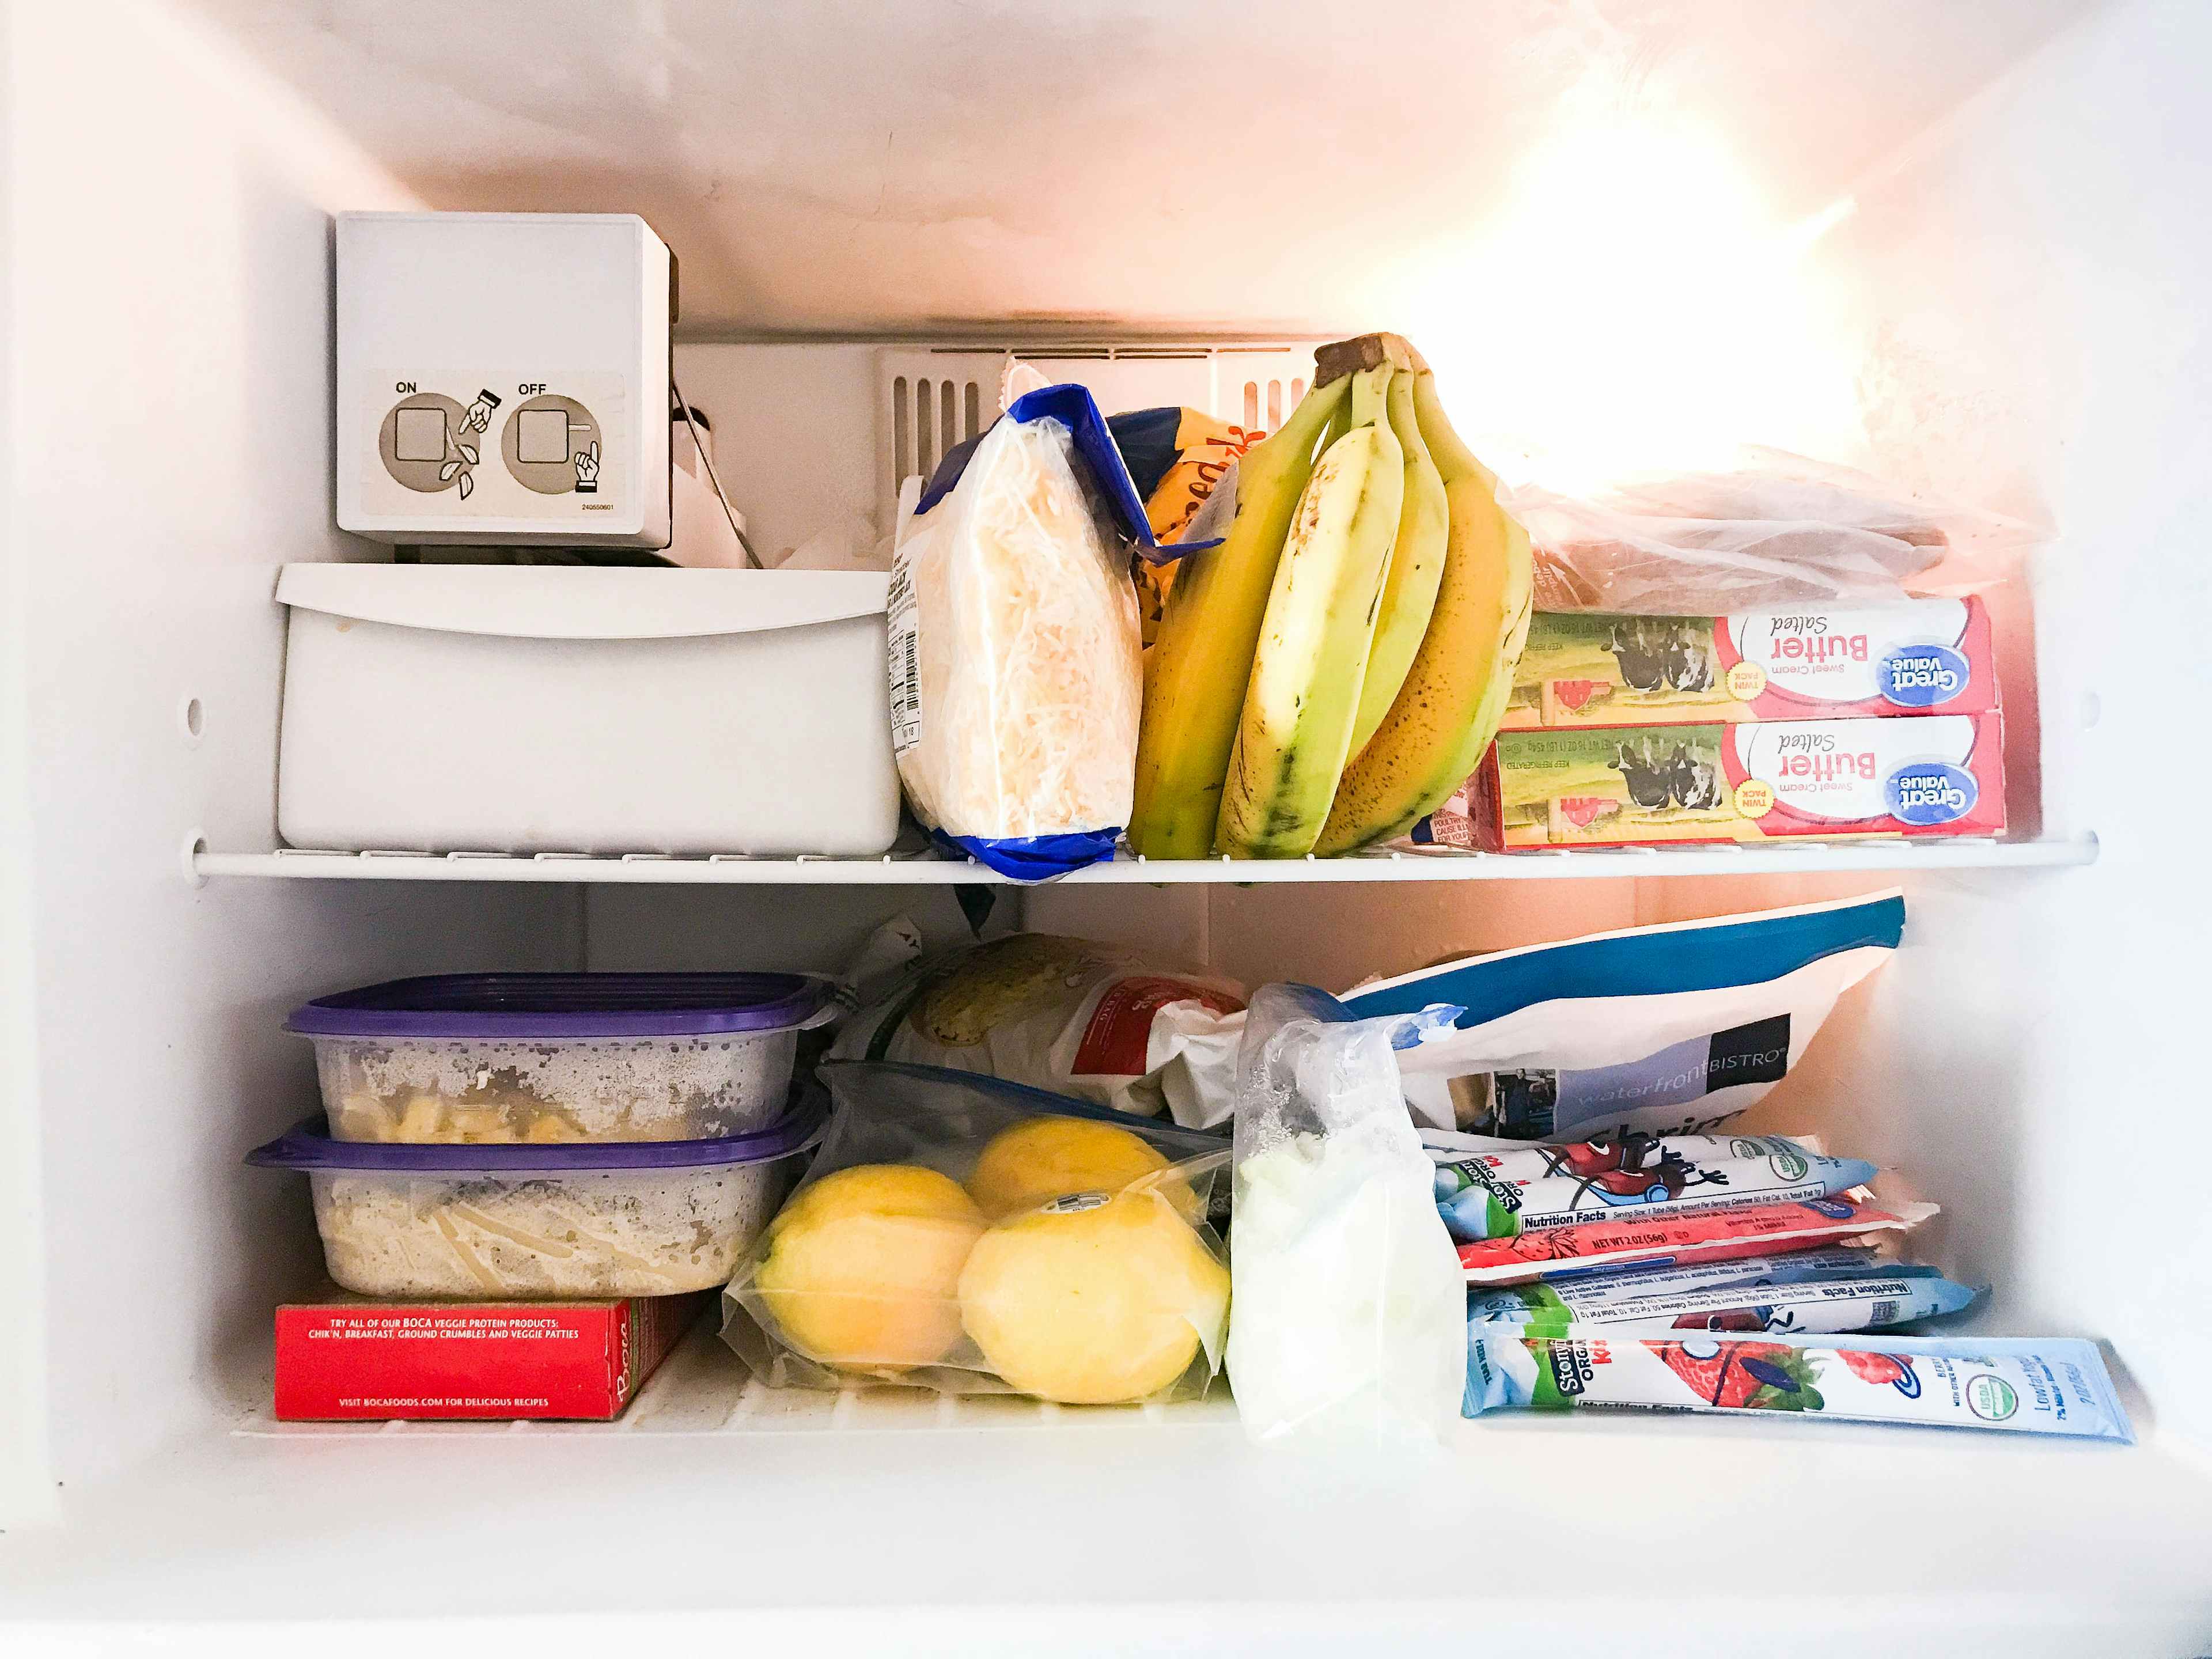 Inside a freezer filled with food.